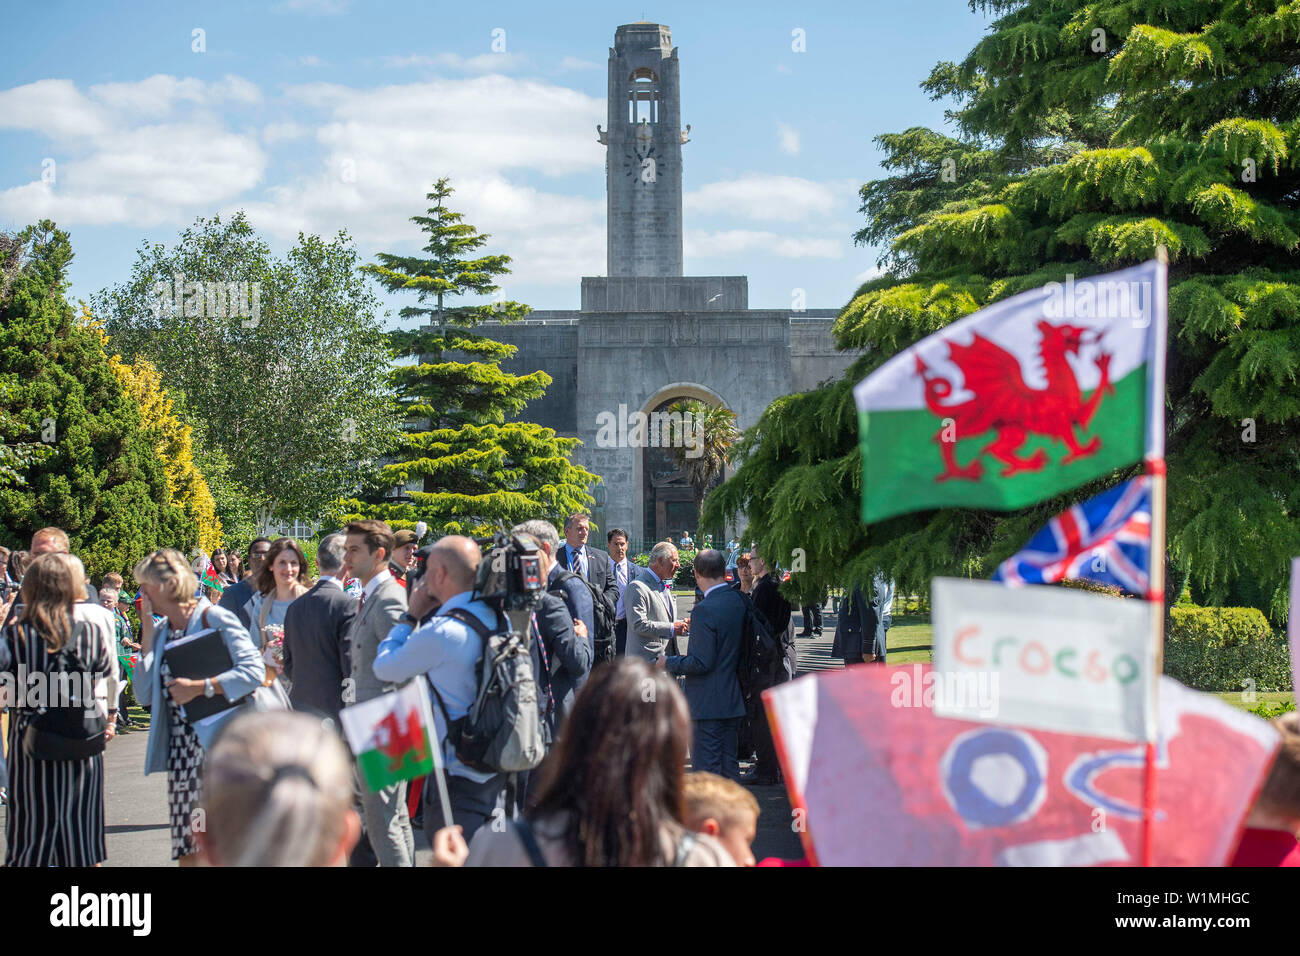 Swansea, Wales, UK. 03rd July, 2019. Prince Charles,  Prince of Wales meets guests during a visit to Victoria Park in Swansea today to help celebrate the 50th anniversary of Swansea achieving City status. The Swansea Guildhall can be seen in the background - on 3rd July 1969, Prince Charles stood on the steps of the Swansea Guildhall to confirm the new city status of Swansea during his Investiture Tour, which was two days after his investiture as Prince of Wales. Credit: Phil Rees/Alamy Live News Stock Photo